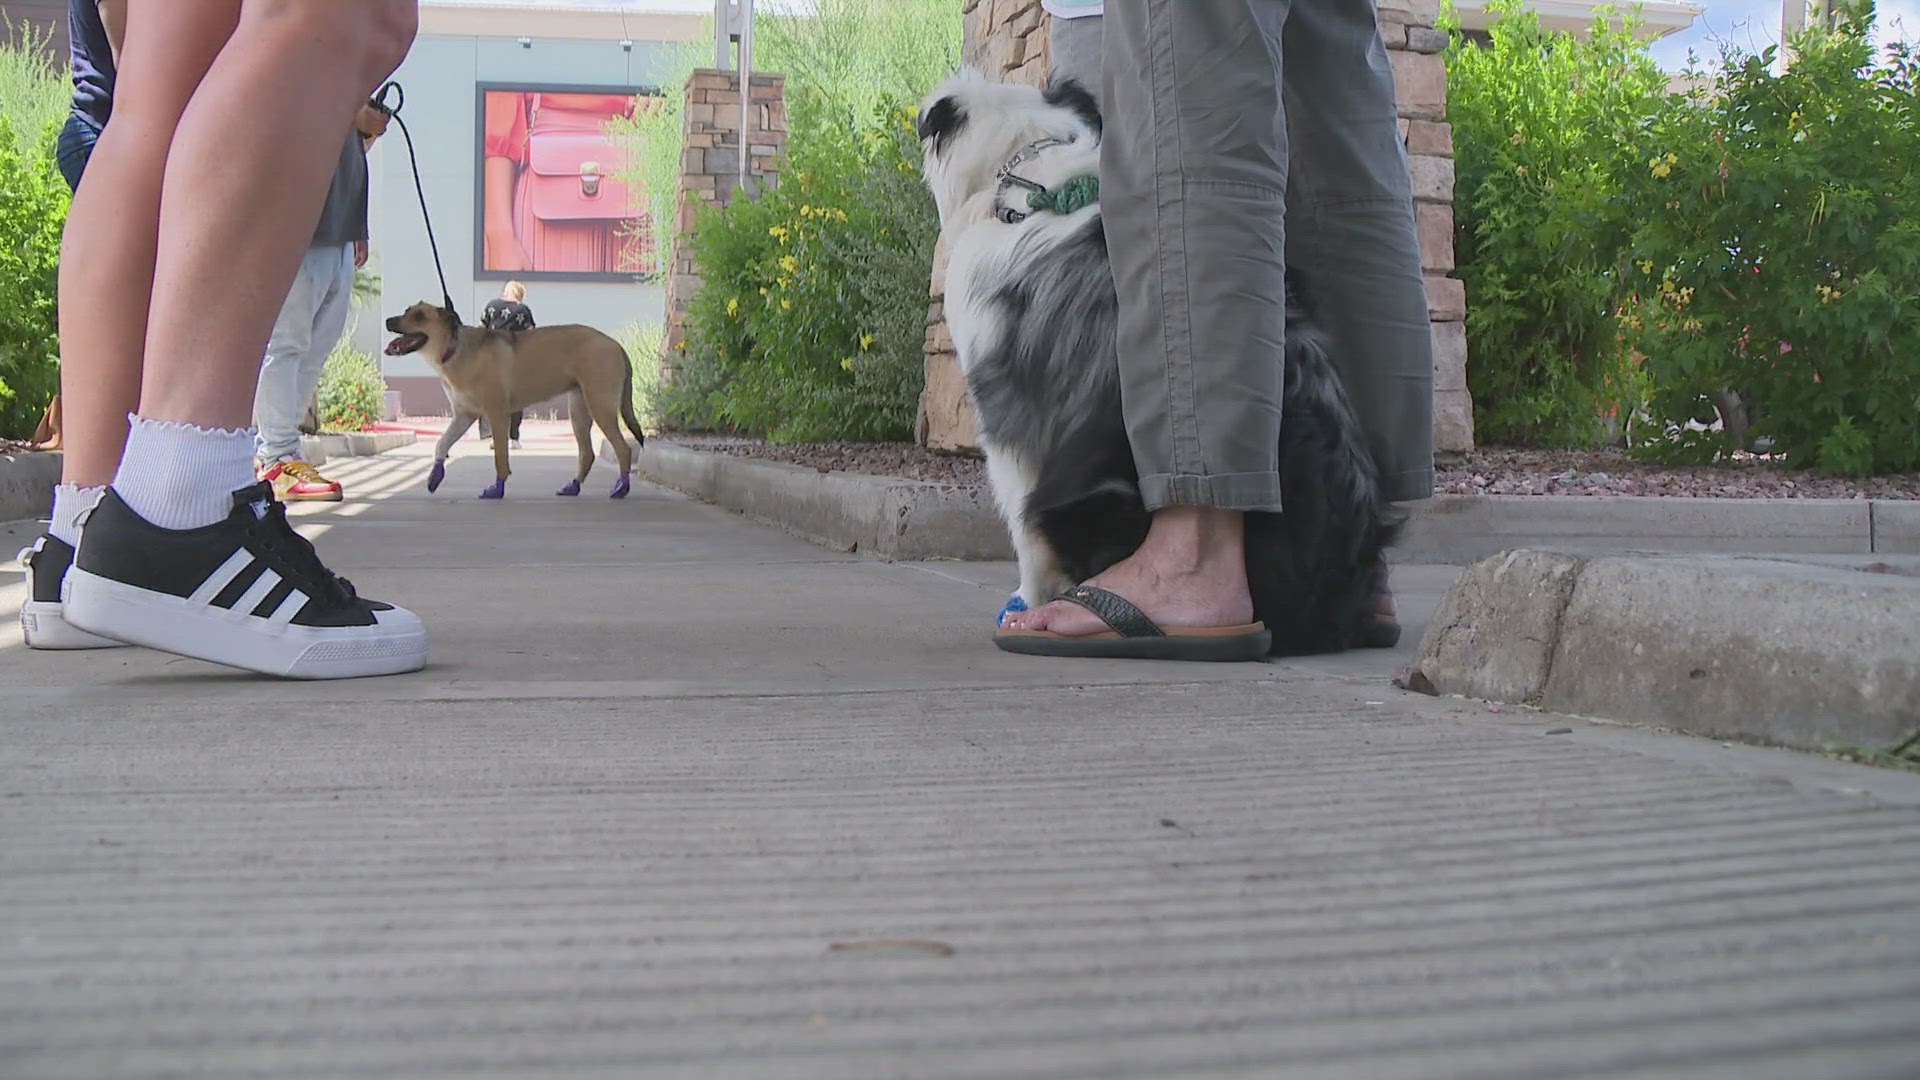 'Cause for Paws' handed out free dog booties to help dog owners keep their pet's paws safe from the hot pavement this summer.